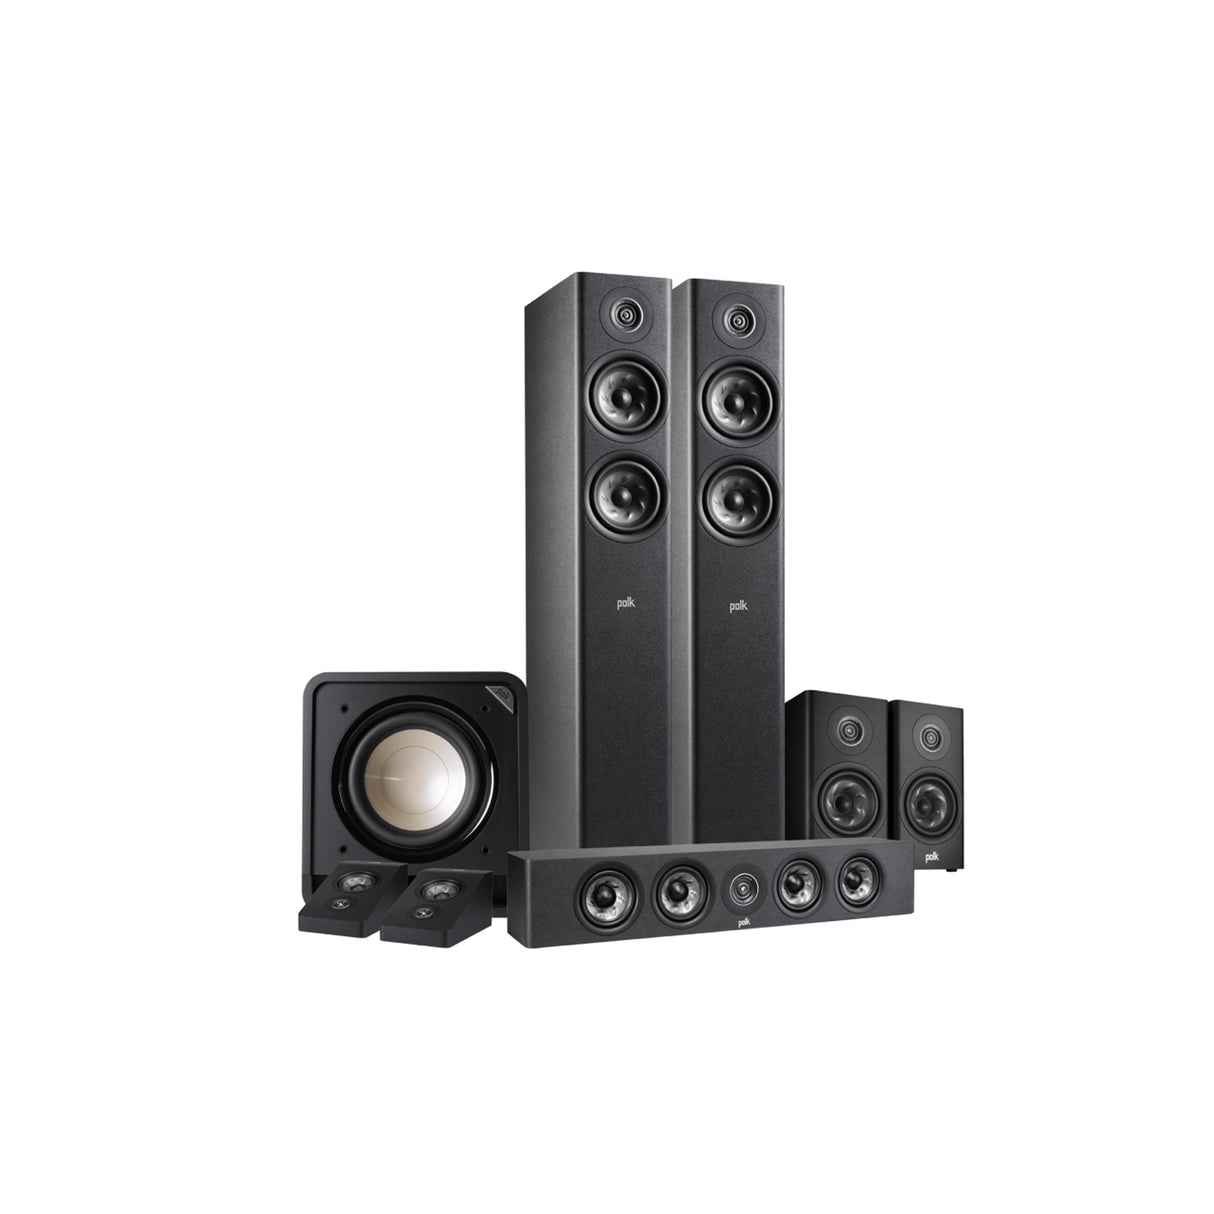 Polk Audio Reserve R 500 Floor Standing + R350 Center + R100 Surrounds + R900 Dolby Atmos Module + Polk Audio HTS-10 Subwoofer (5.1.2 Dolby Atmos Speaker Package Bundle)